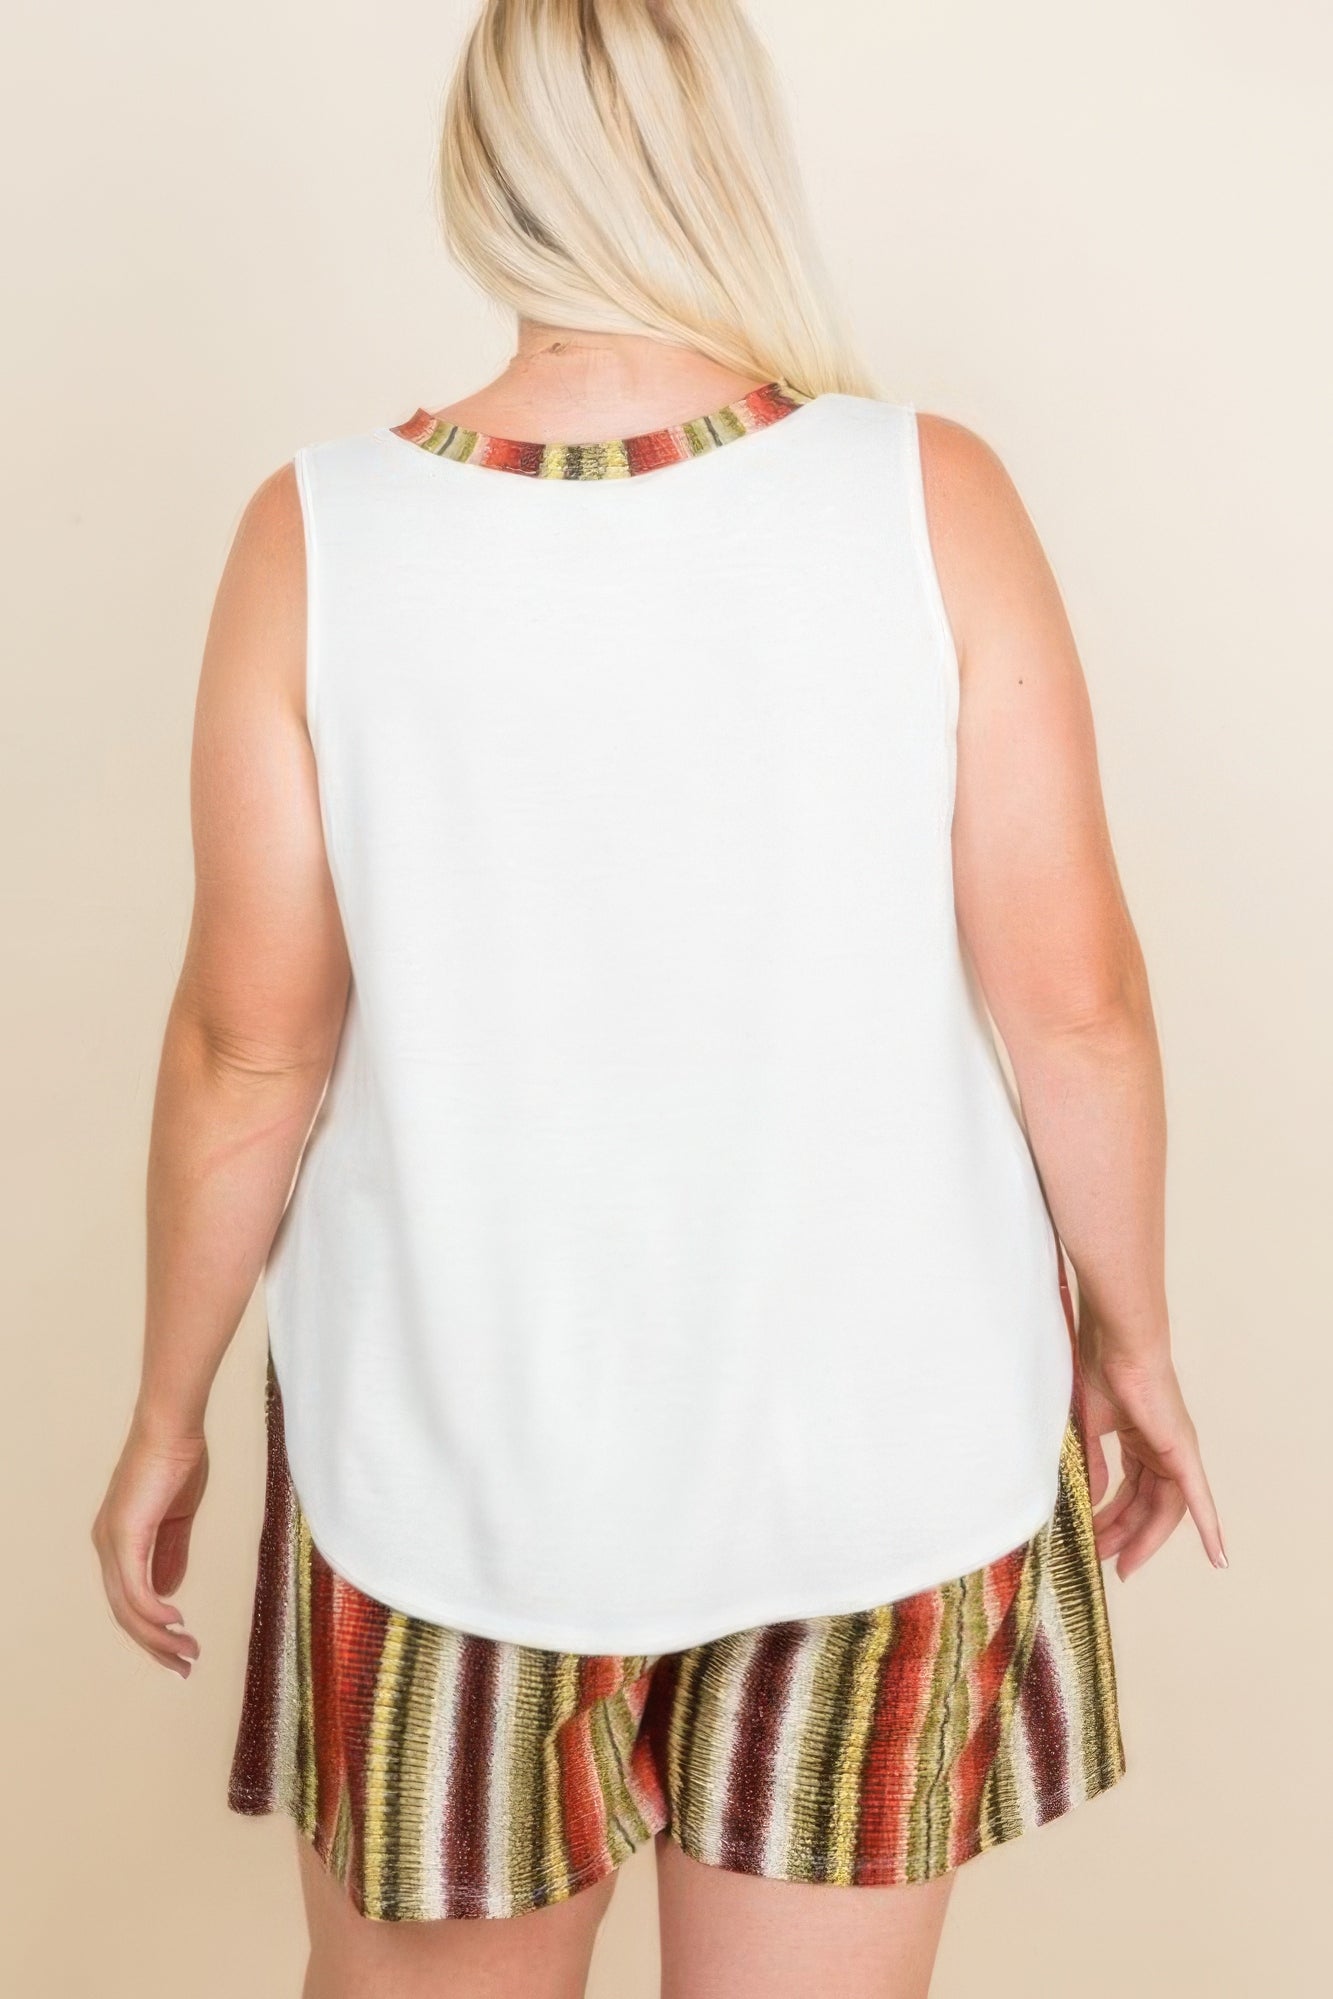 - Voluptuous (+) Plus Size Solid Sleeveless French Terry Tank Top for Women - womens tank top at TFC&H Co.